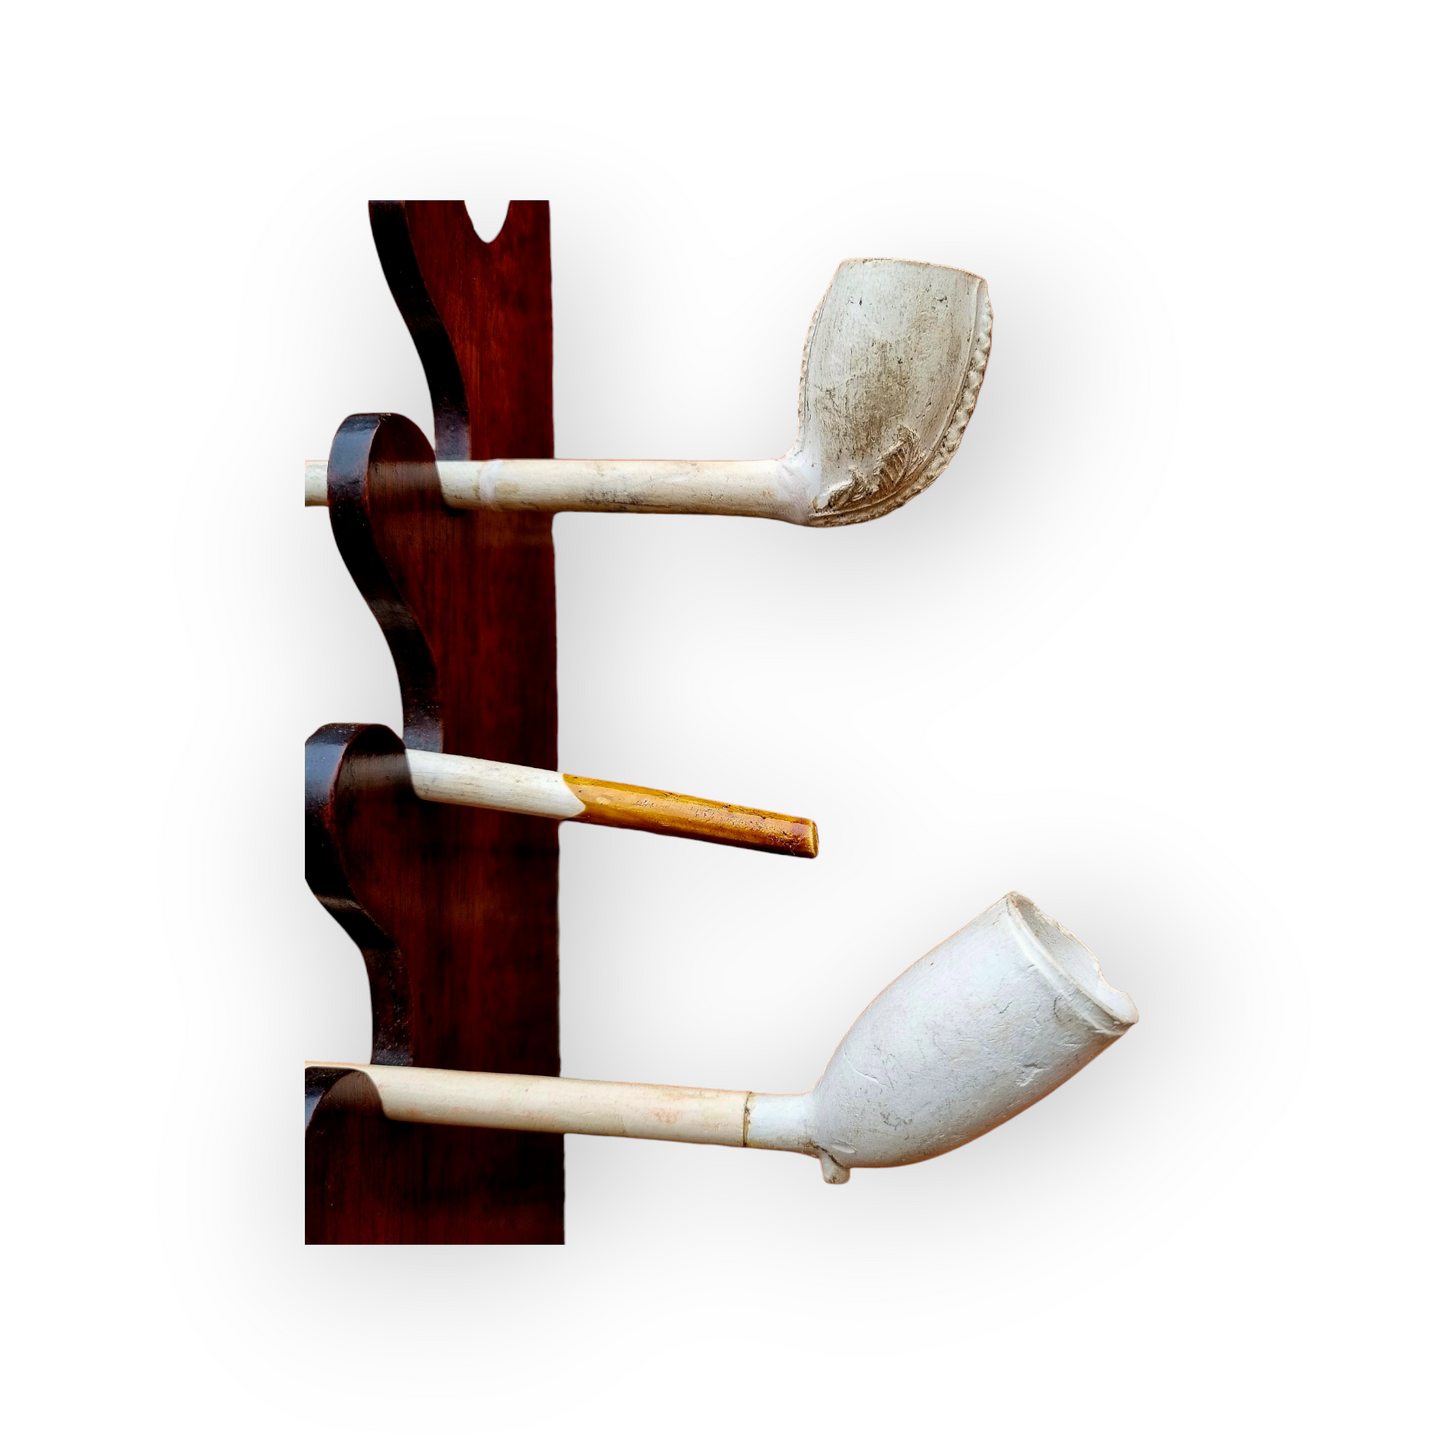 Late 18th Century English Antique Pipe Rack & Three Associated 19th Century Clay Pipes